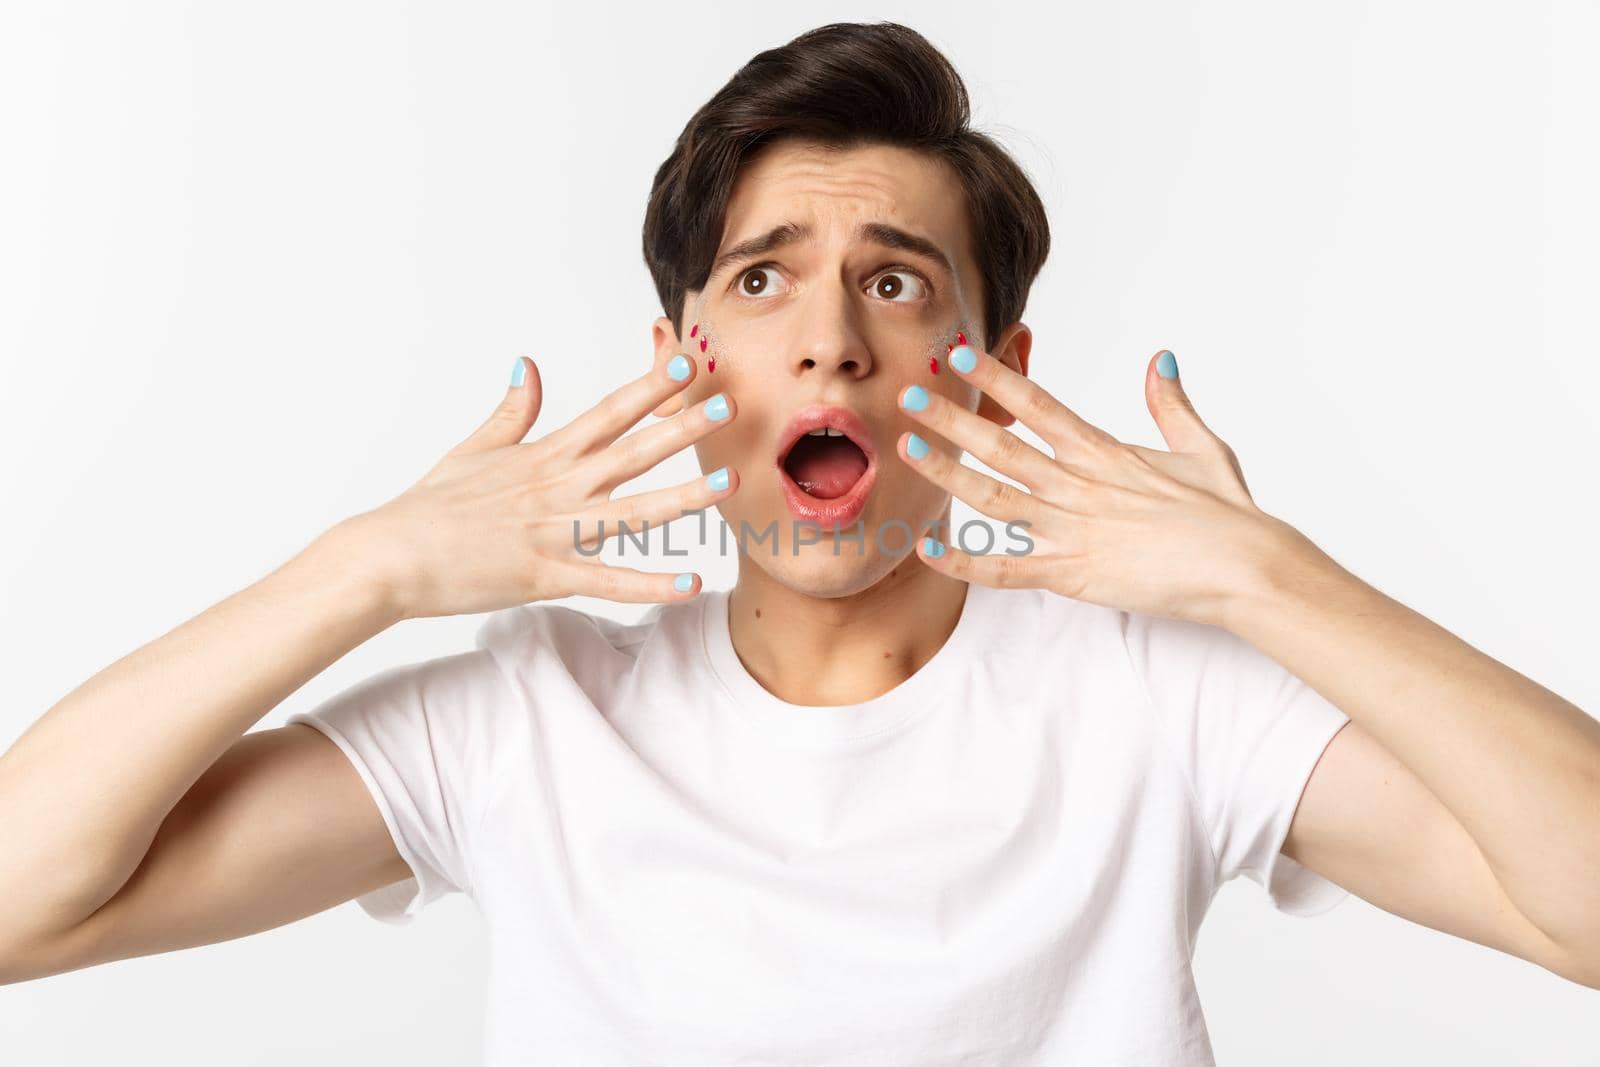 People, lgbtq and beauty concept. Close-up of gay man panicking, showing nail polish on hands, looking alarmed and worried, standing over white background.